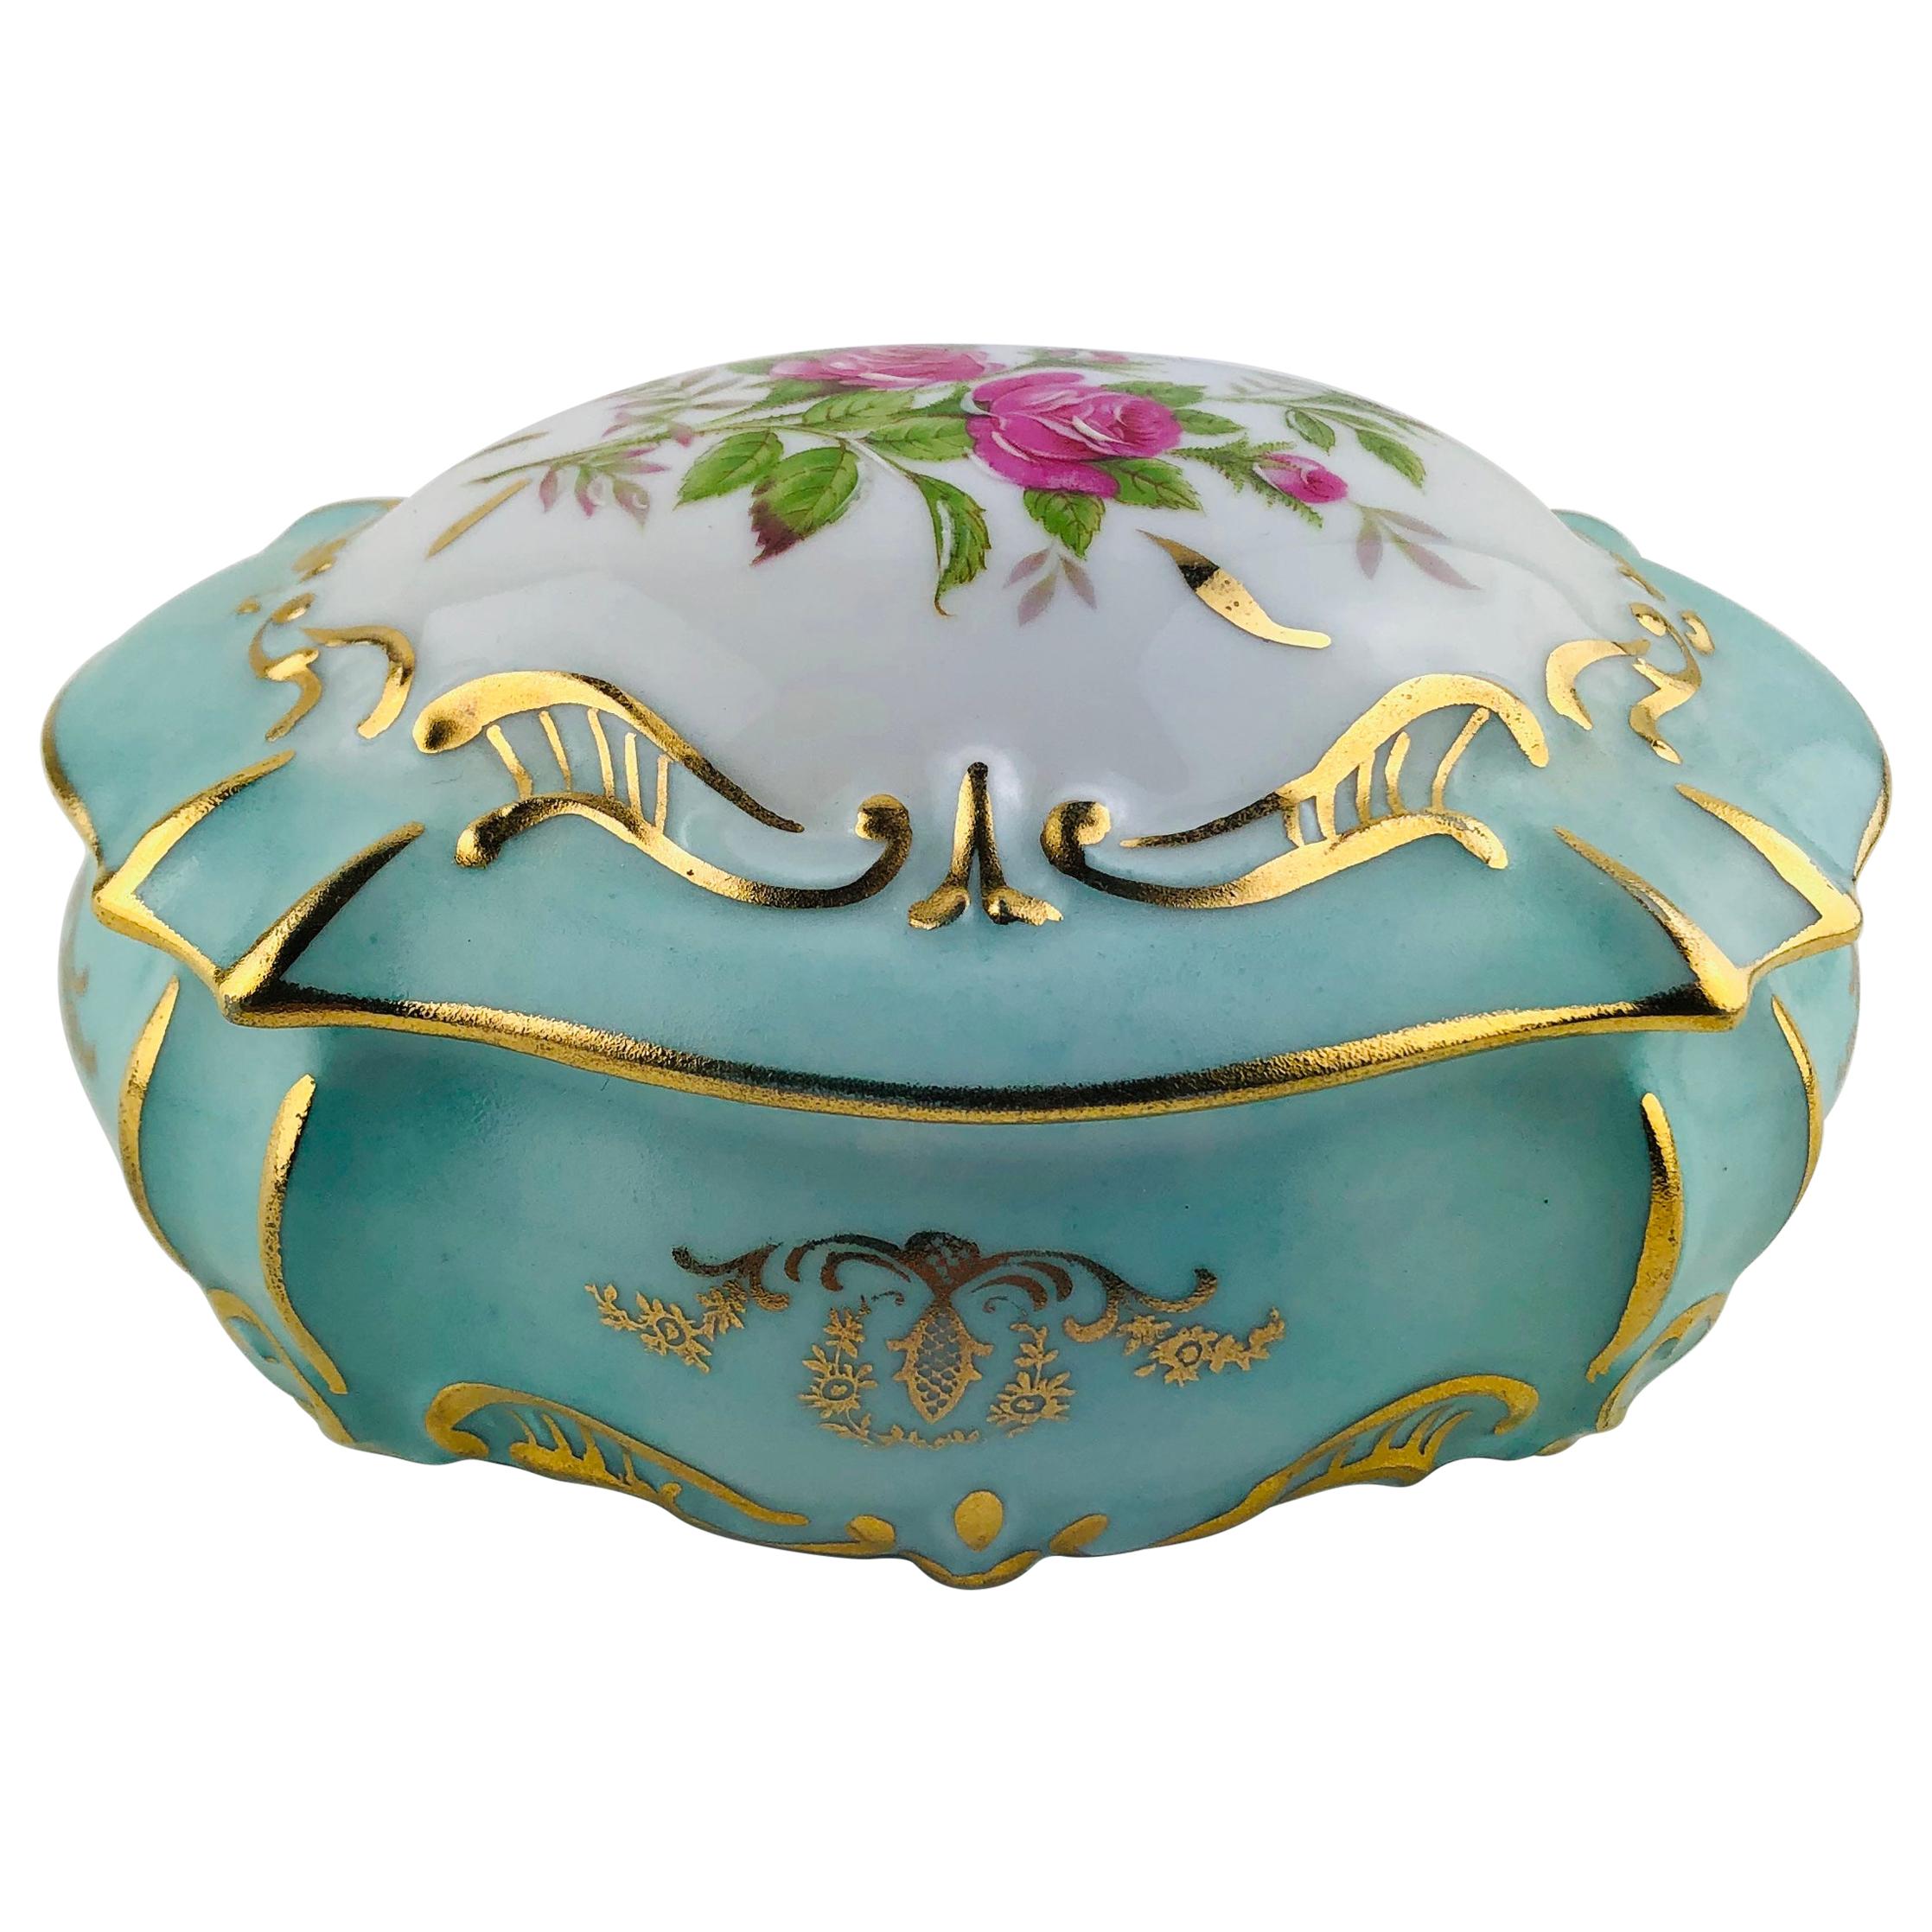 Exquisite French Limoges Hand Painted Gold Trim Trinket or Jewelry Box